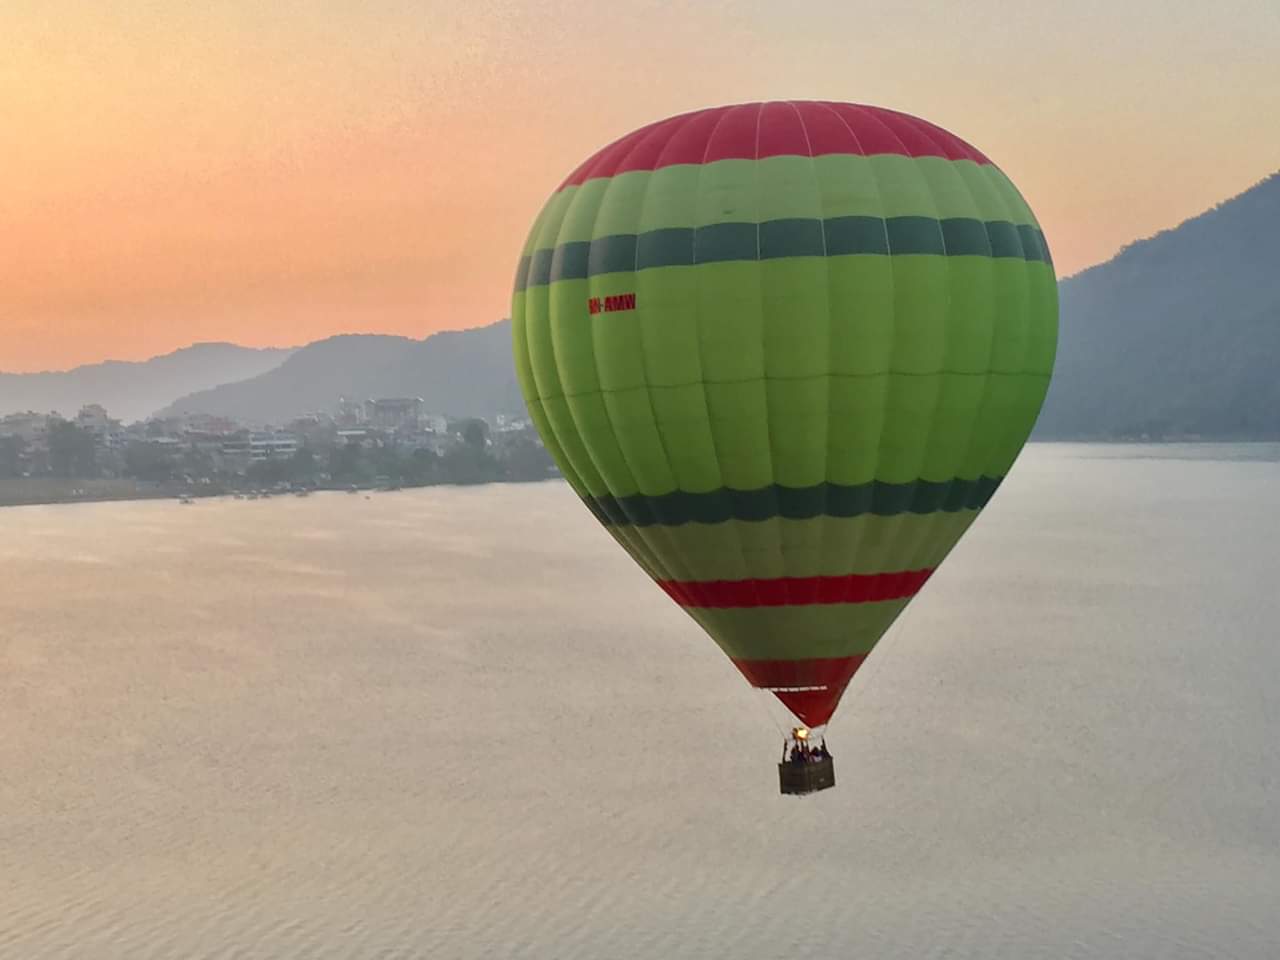 Hot air balloon to be re-launched in Pokhara